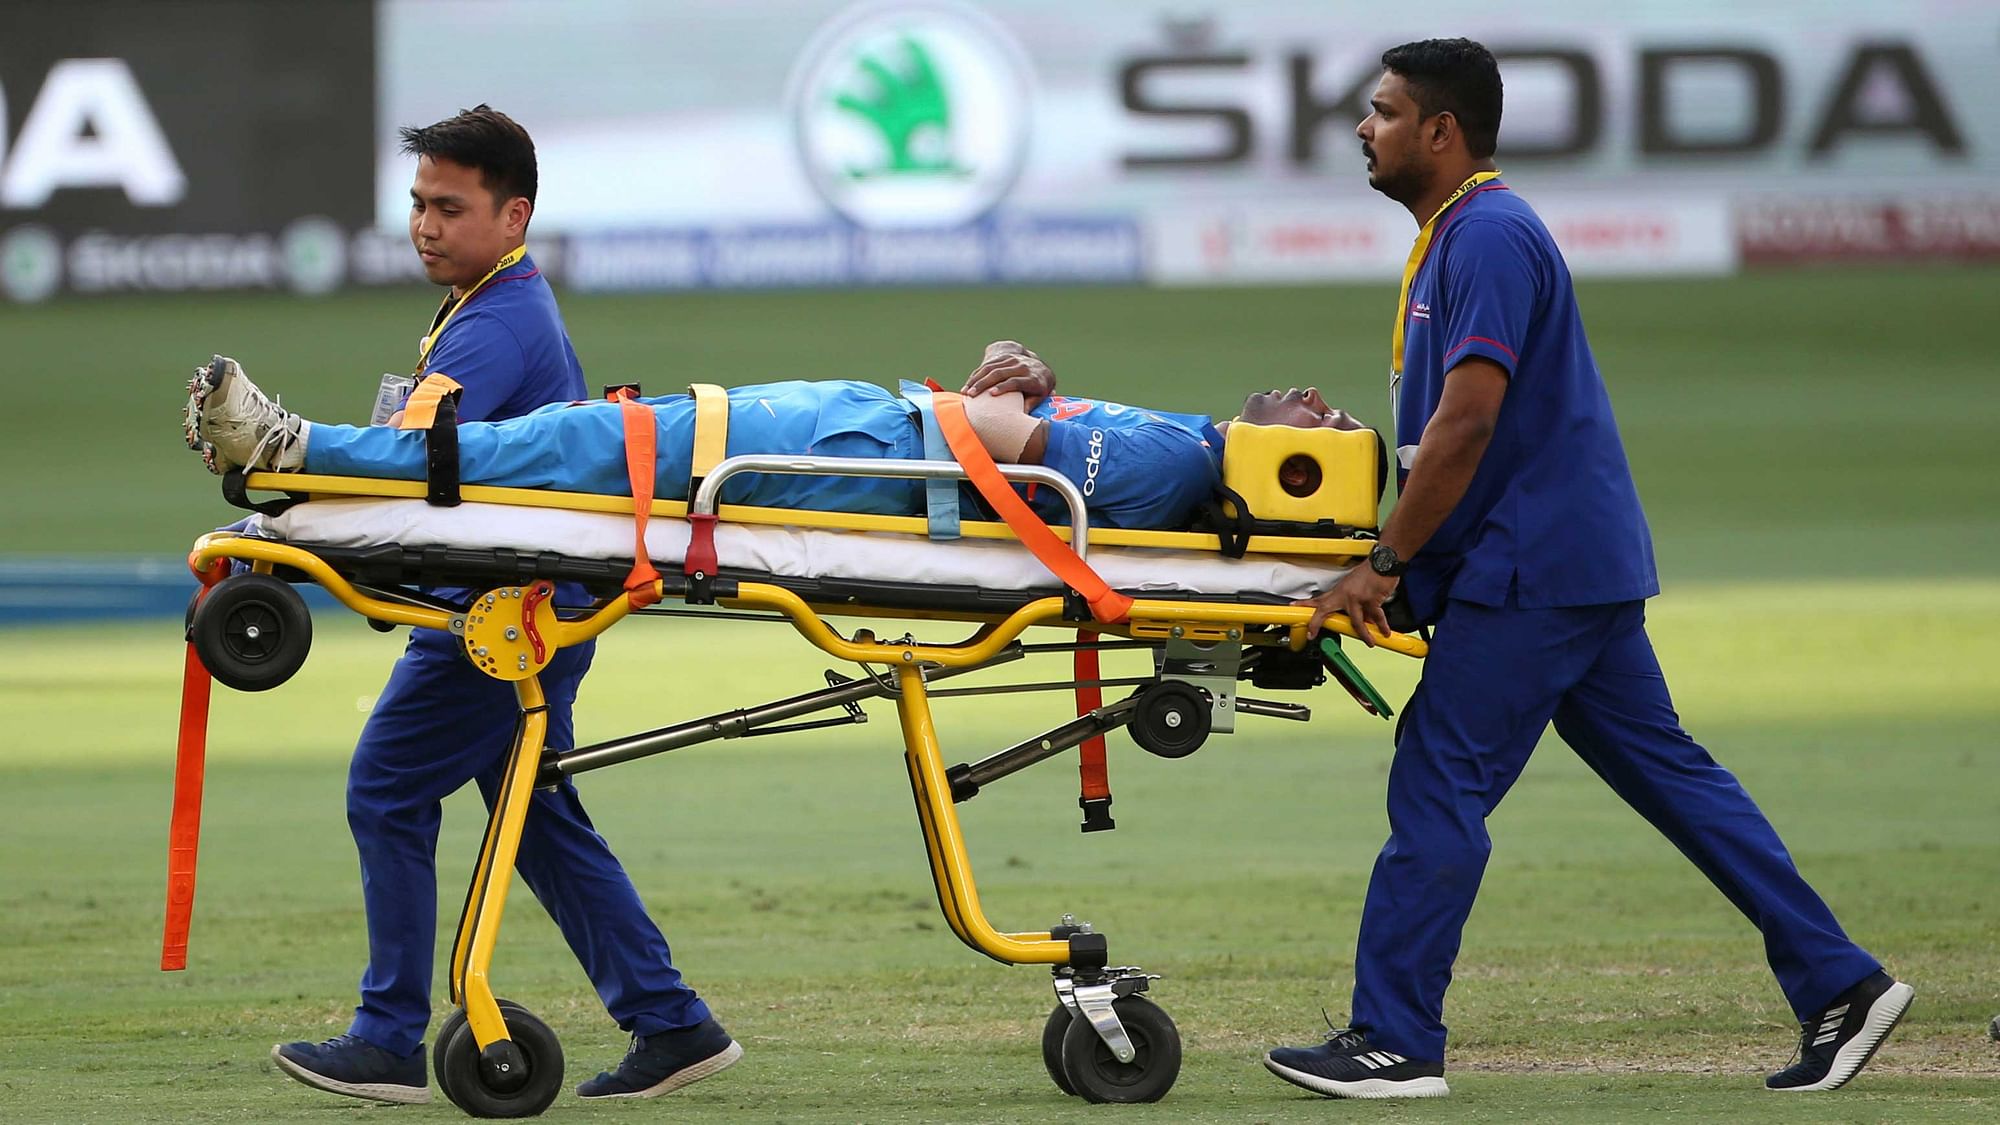 India’s Hardik Pandya is taken out of the field on a stretcher after he fell after bowling a delivery during the one day international cricket match of Asia Cup between India and Pakistan in Dubai, United Arab Emirates, Wednesday, Sept. 19, 2018.